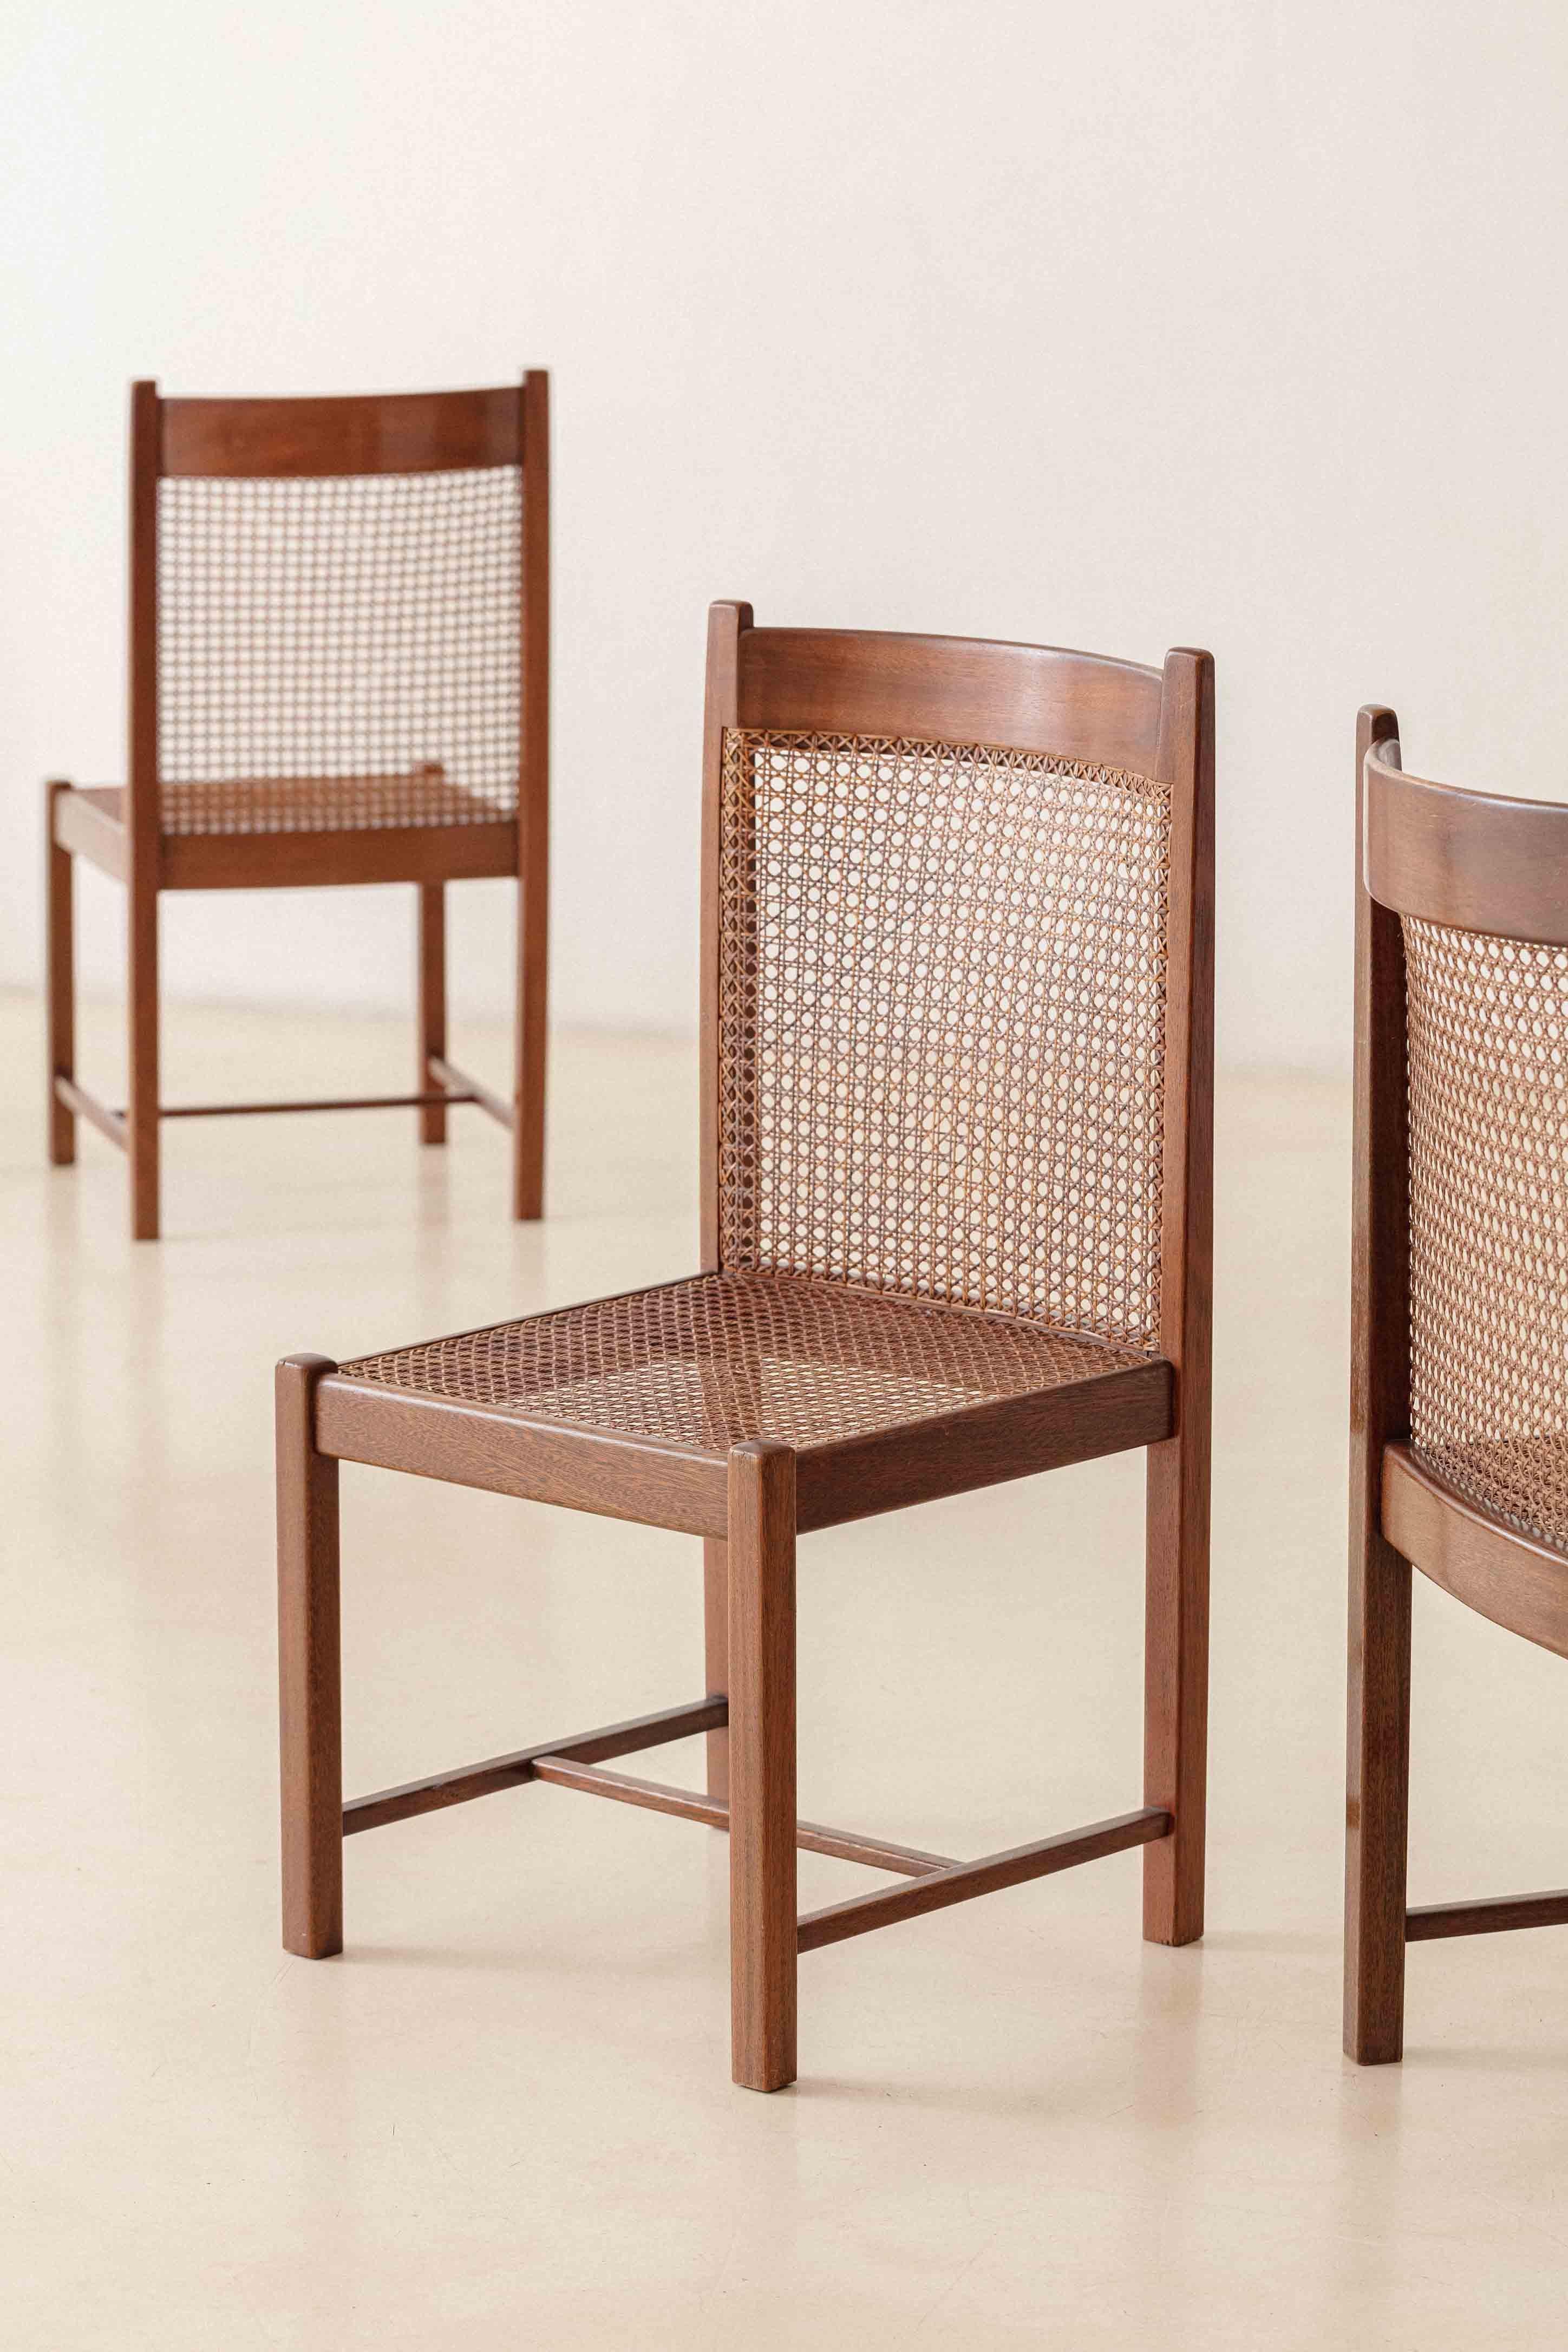 Brazilian Rosewood Dining Chairs by Fatima Arquitetura Interiores 'FAI', 1960s For Sale 2